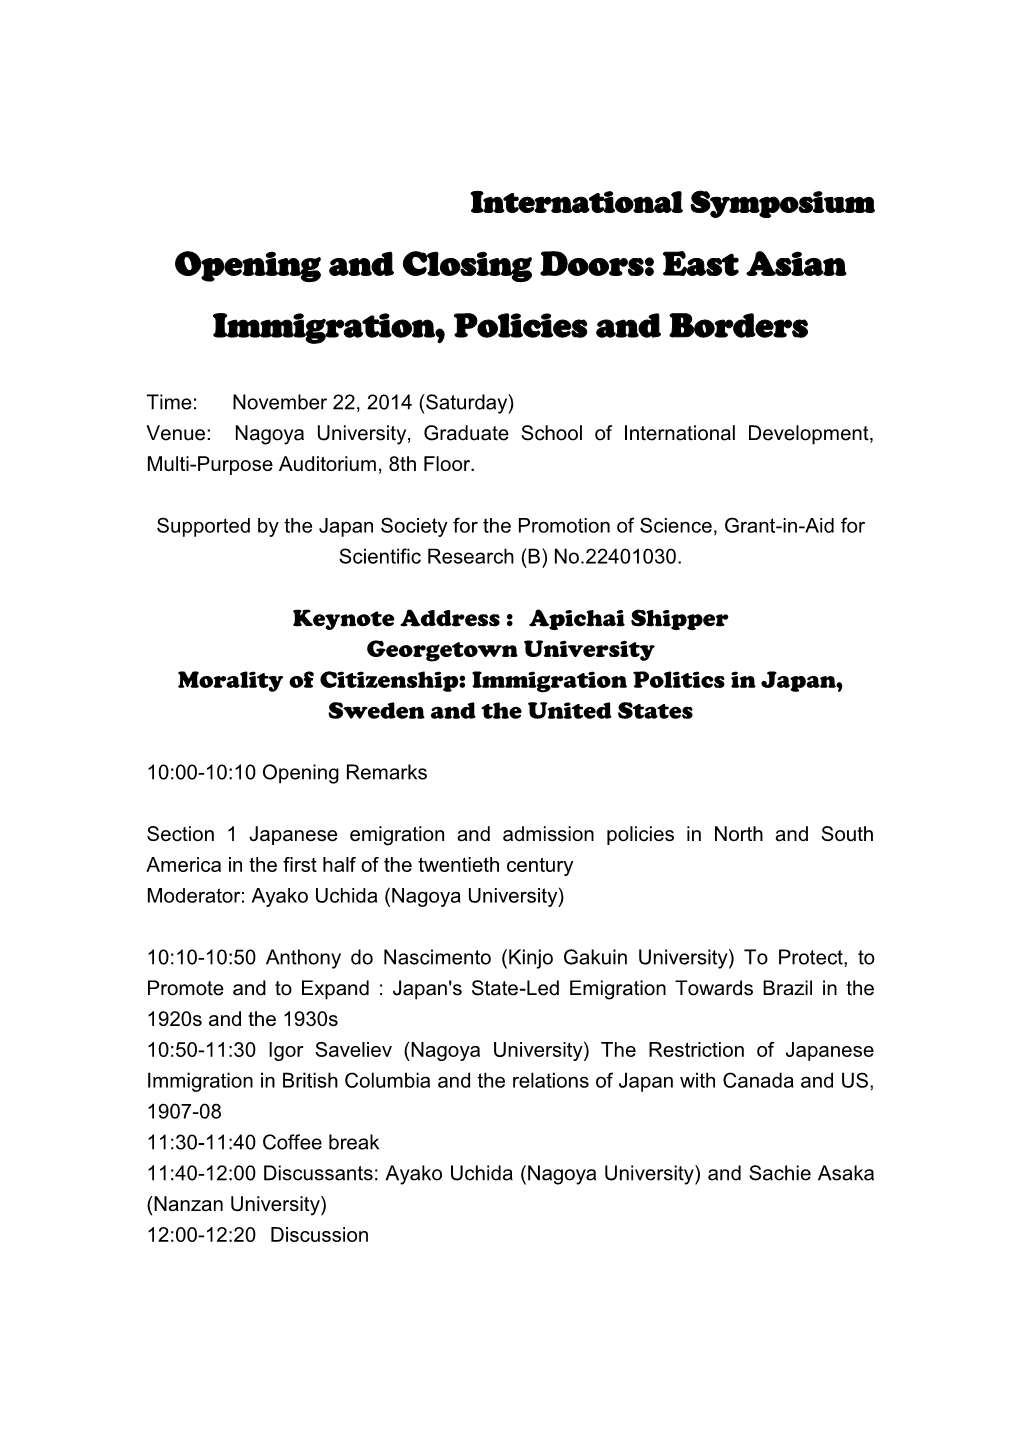 Opening and Closing Doors: East Asian Immigration, Policies and Borders